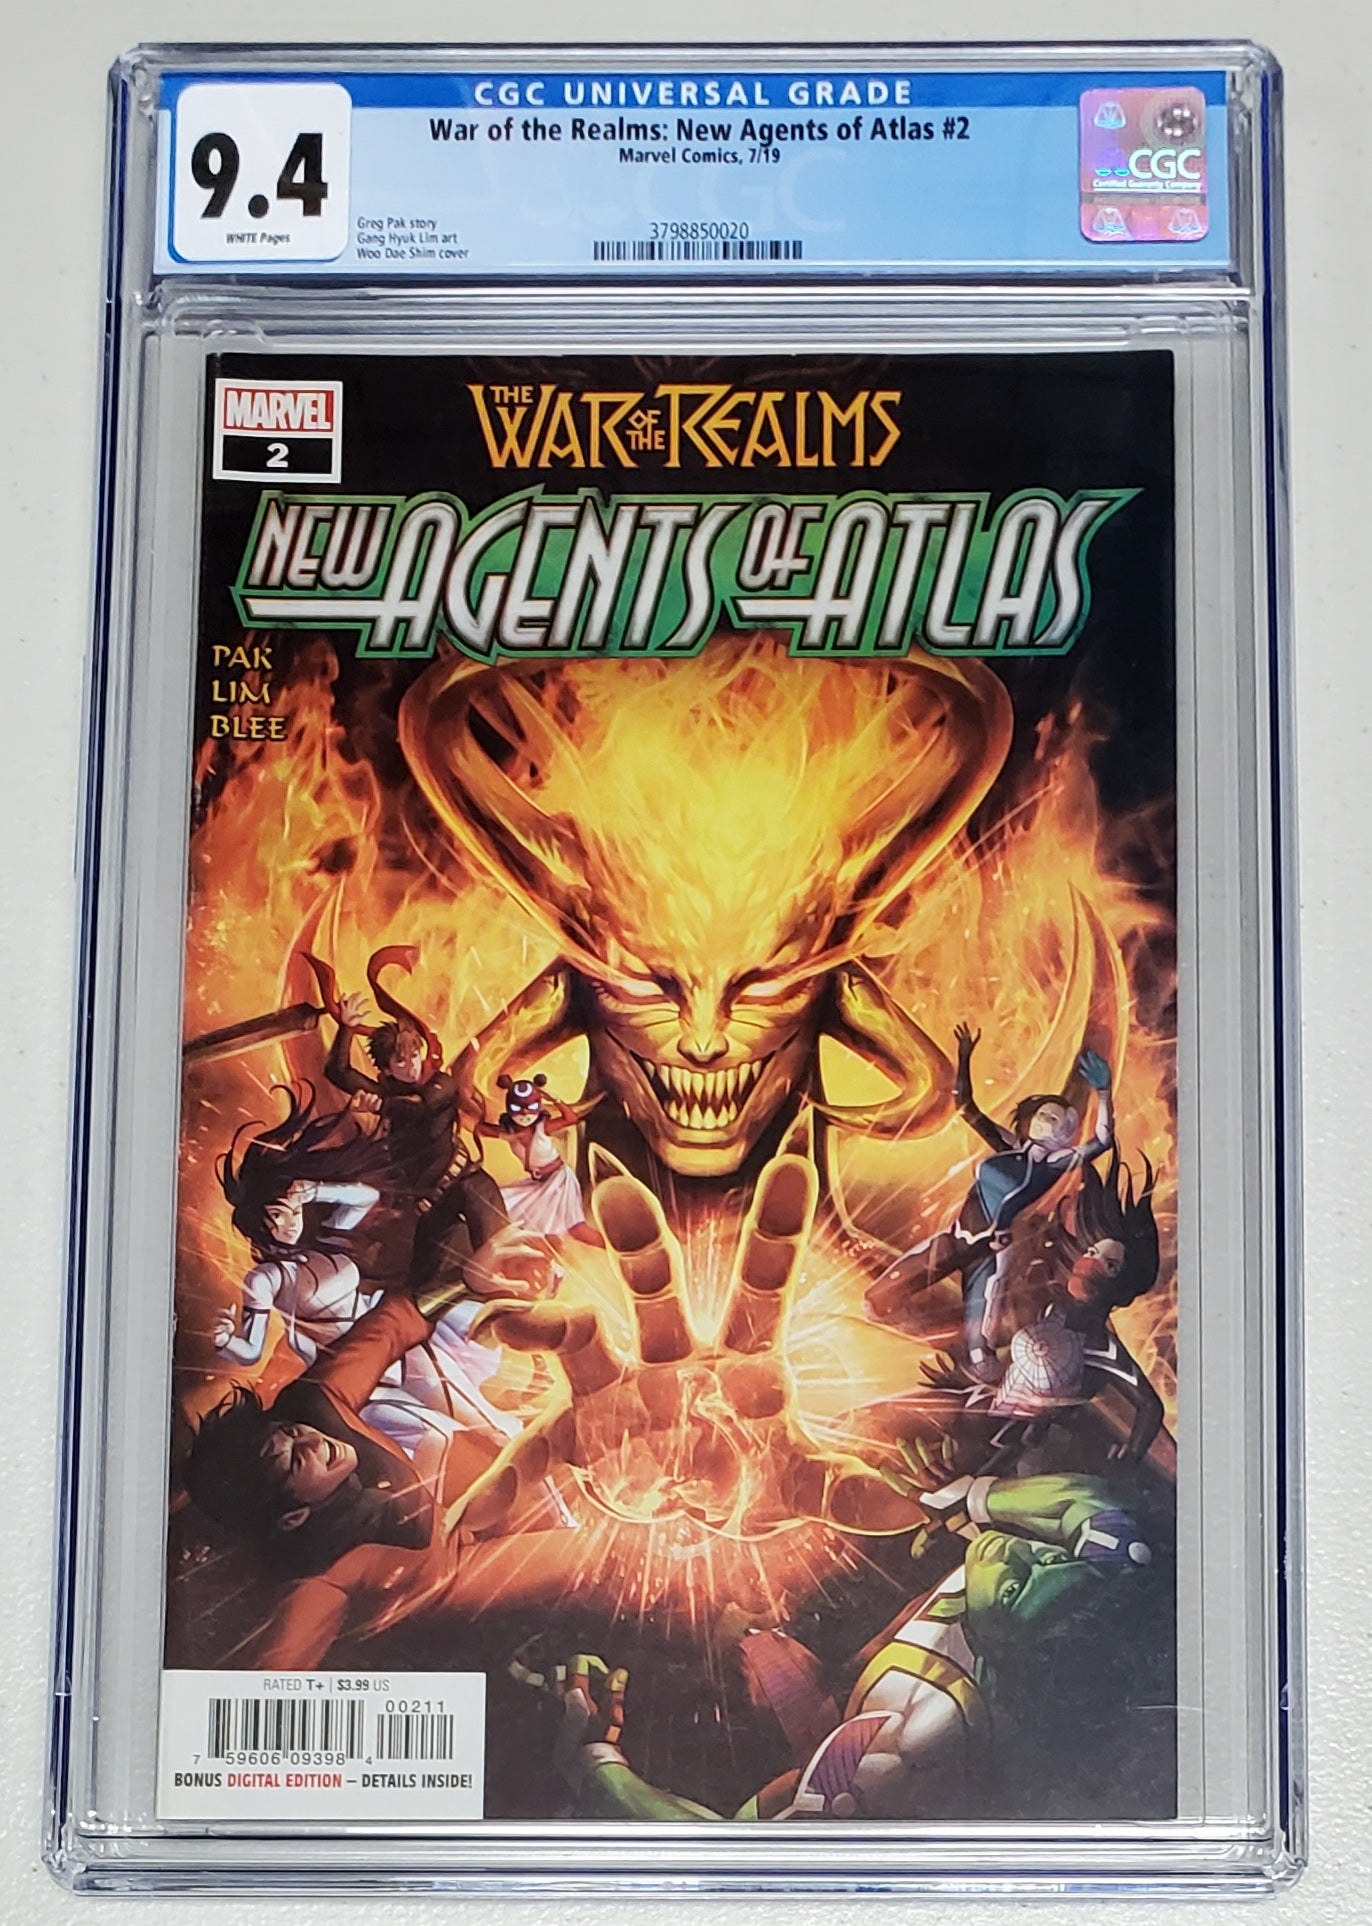 9.4 CGC WAR OF THE REALMS NEW AGENTS OF ATLAS #2 [3798850020]